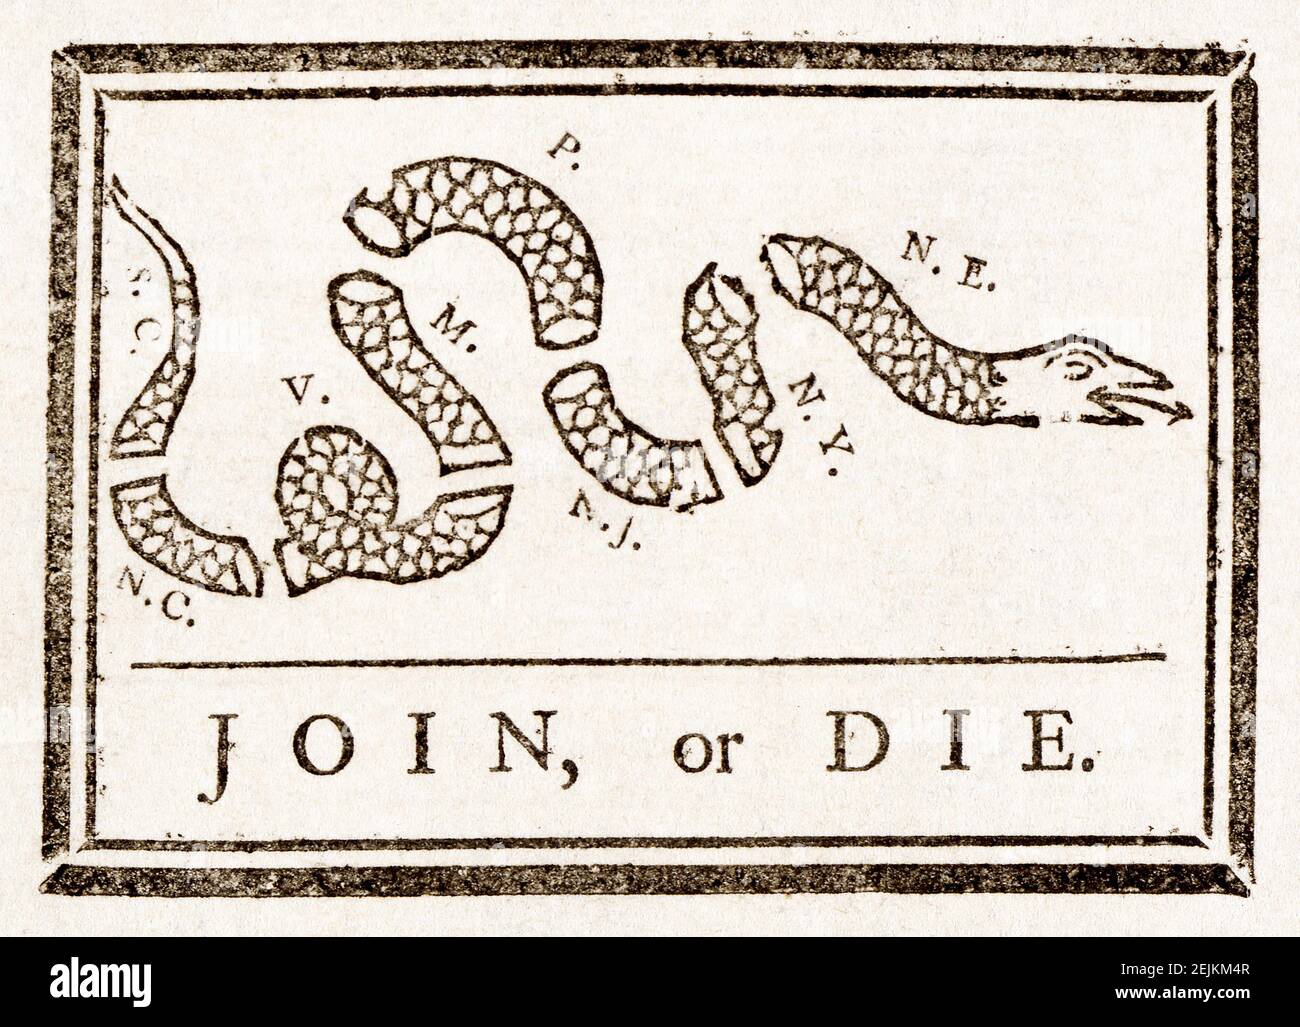 Join, or Die. is a political cartoon attributed to Benjamin Franklin. The original publication by the Pennsylvania Gazette on May 9, 1754, is the earliest known pictorial representation of colonial union produced by an American colonist in Colonial America. Stock Photo